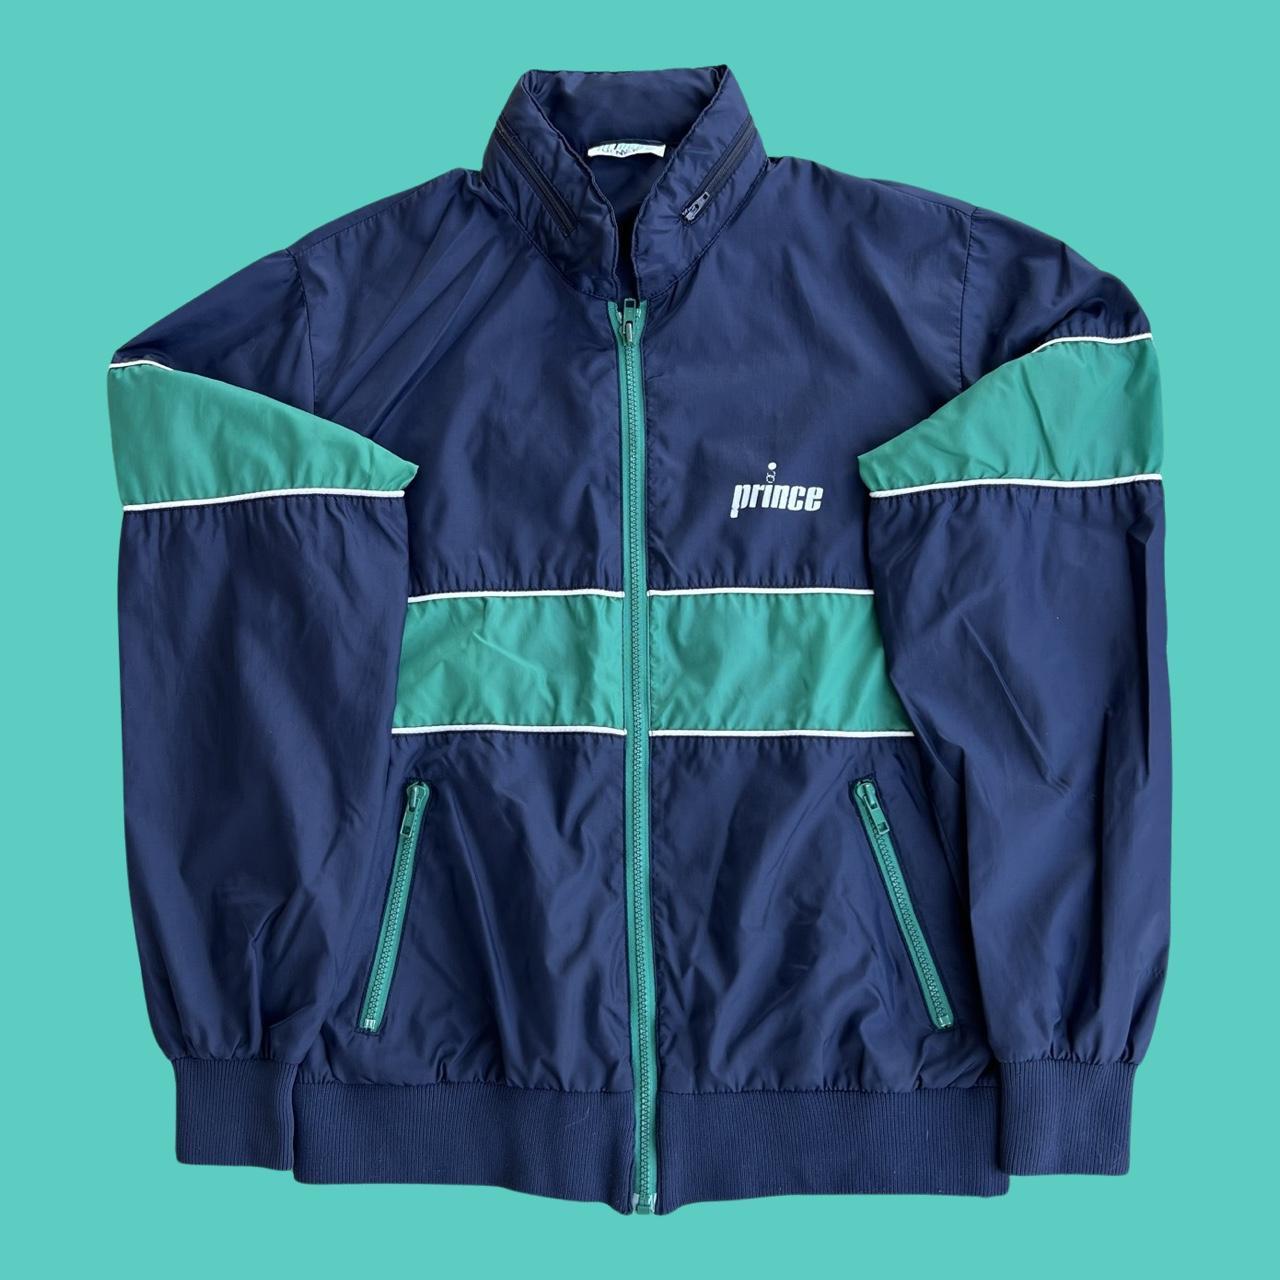 Prince Men's Navy and Green Jacket